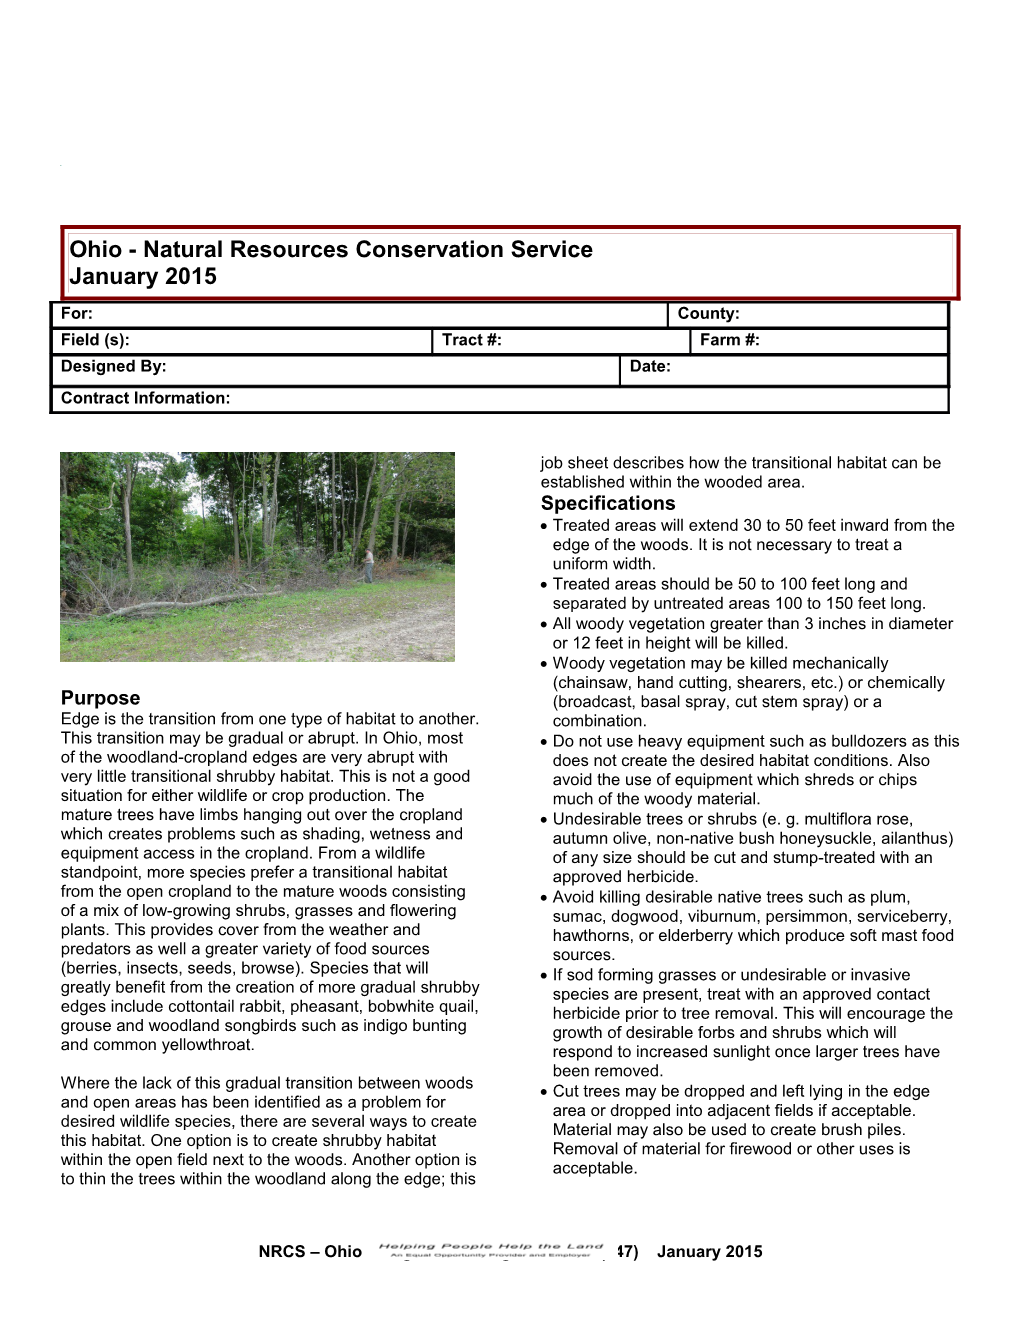 Ohio - Natural Resources Conservation Service January 2015